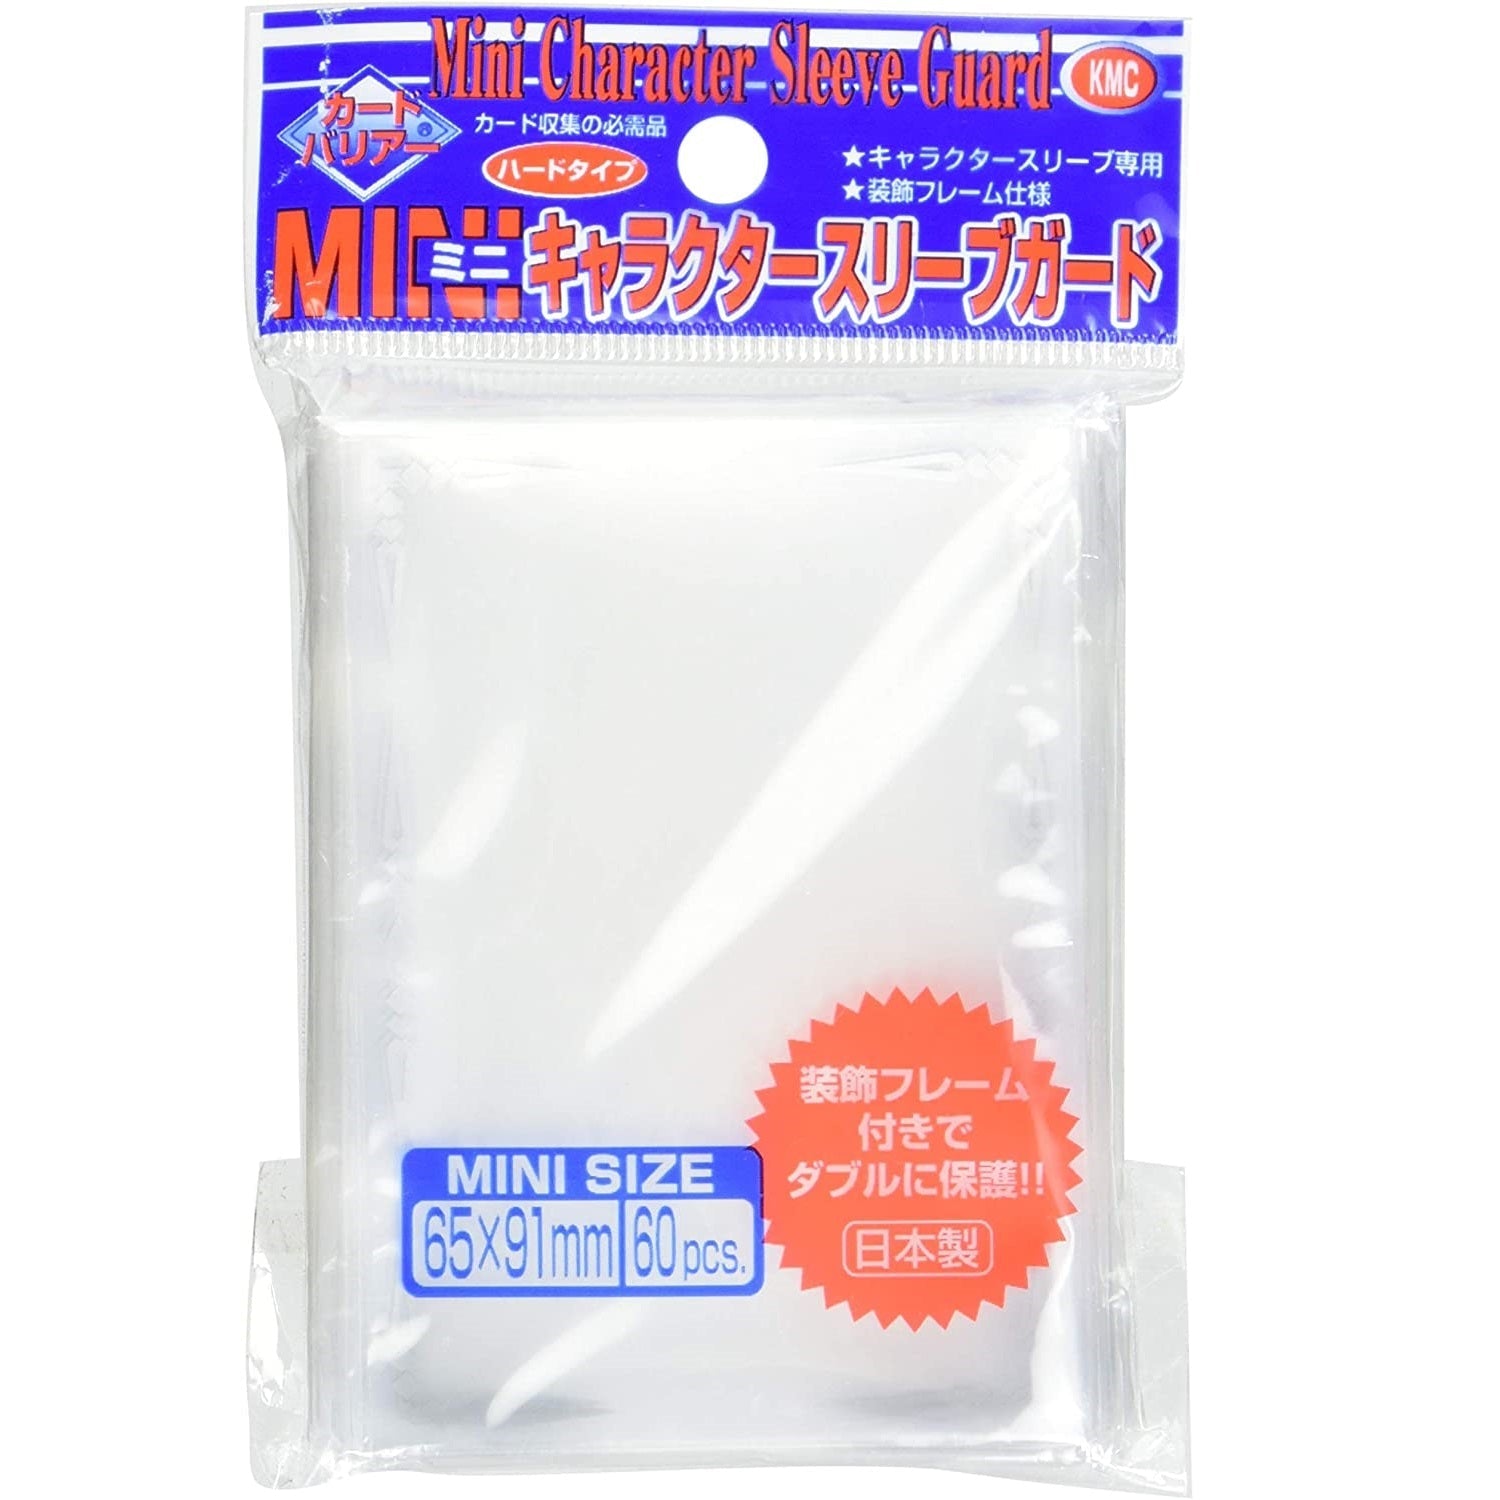 KMC Sleeve Character Sleeve Guard Mini Size 60pcs (Silver Frame)-KMC-Ace Cards & Collectibles